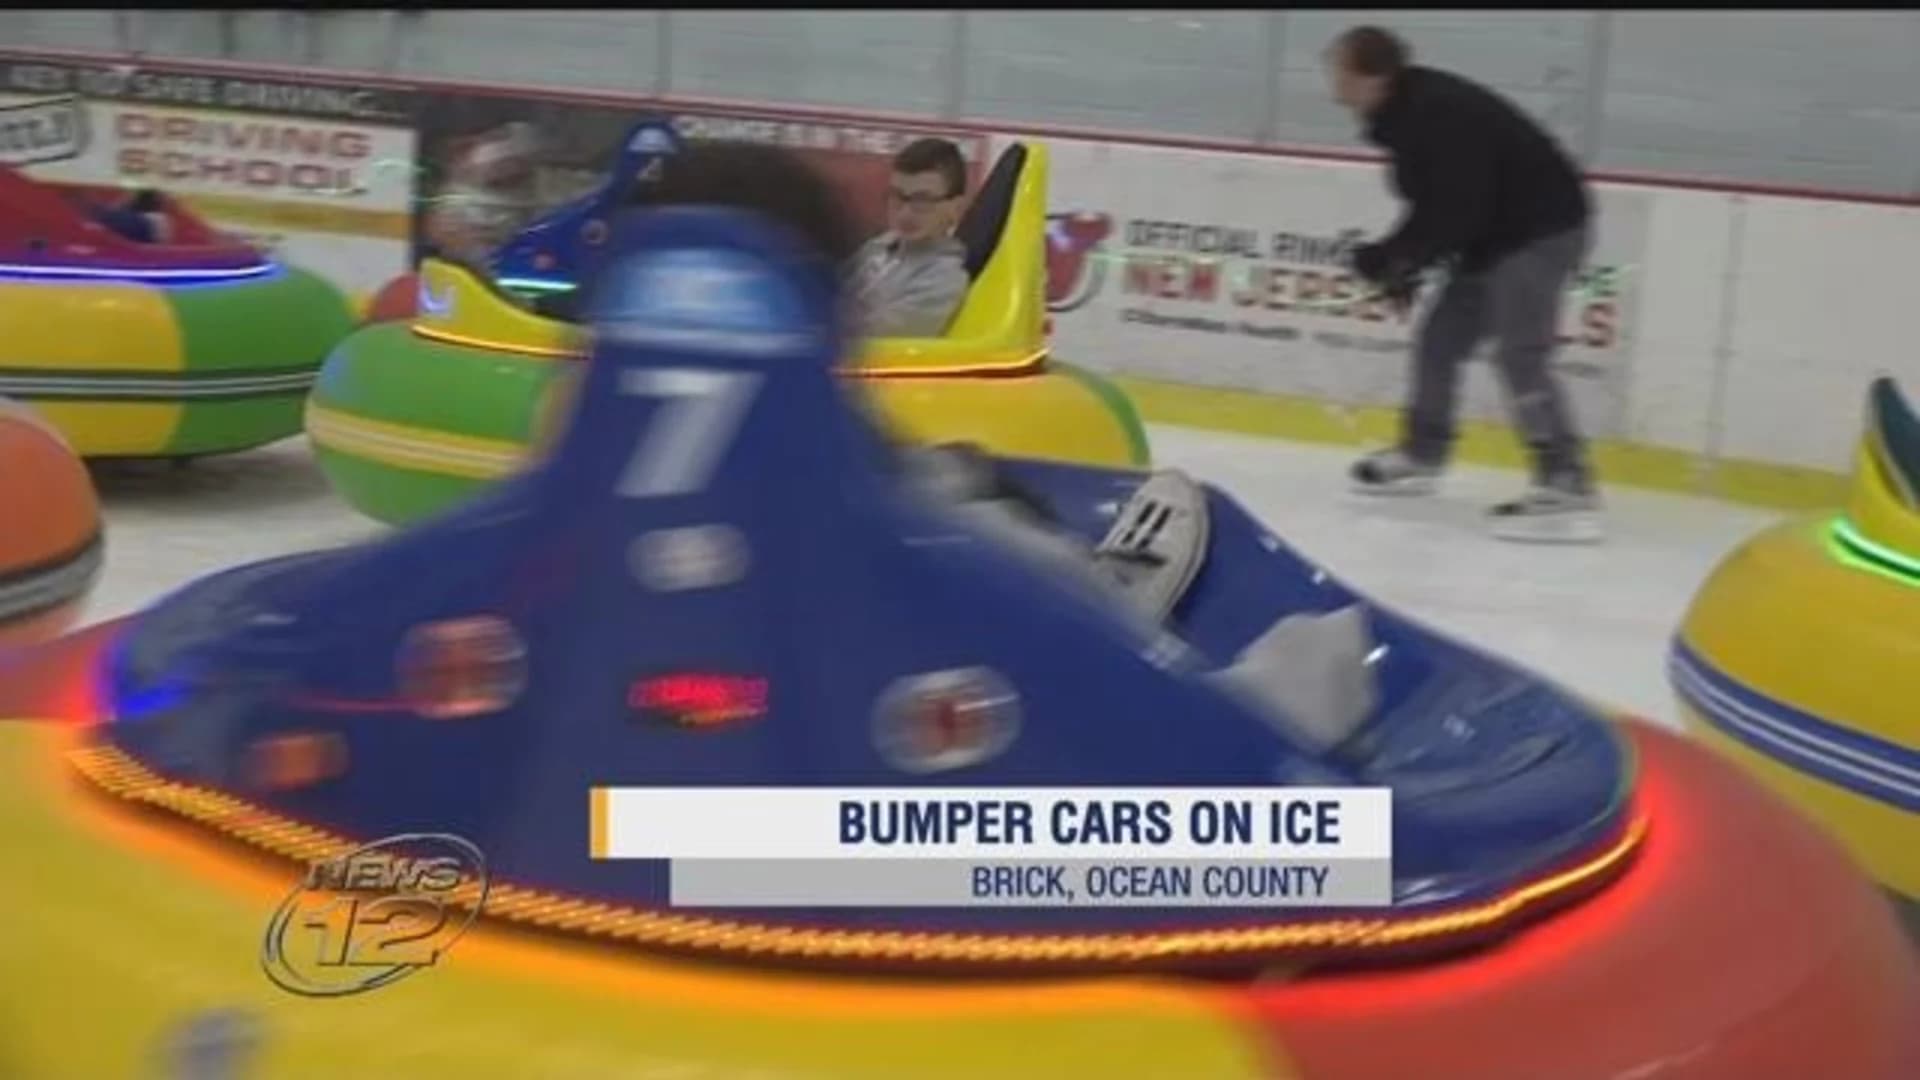 Ocean County rink features ice bumper cars